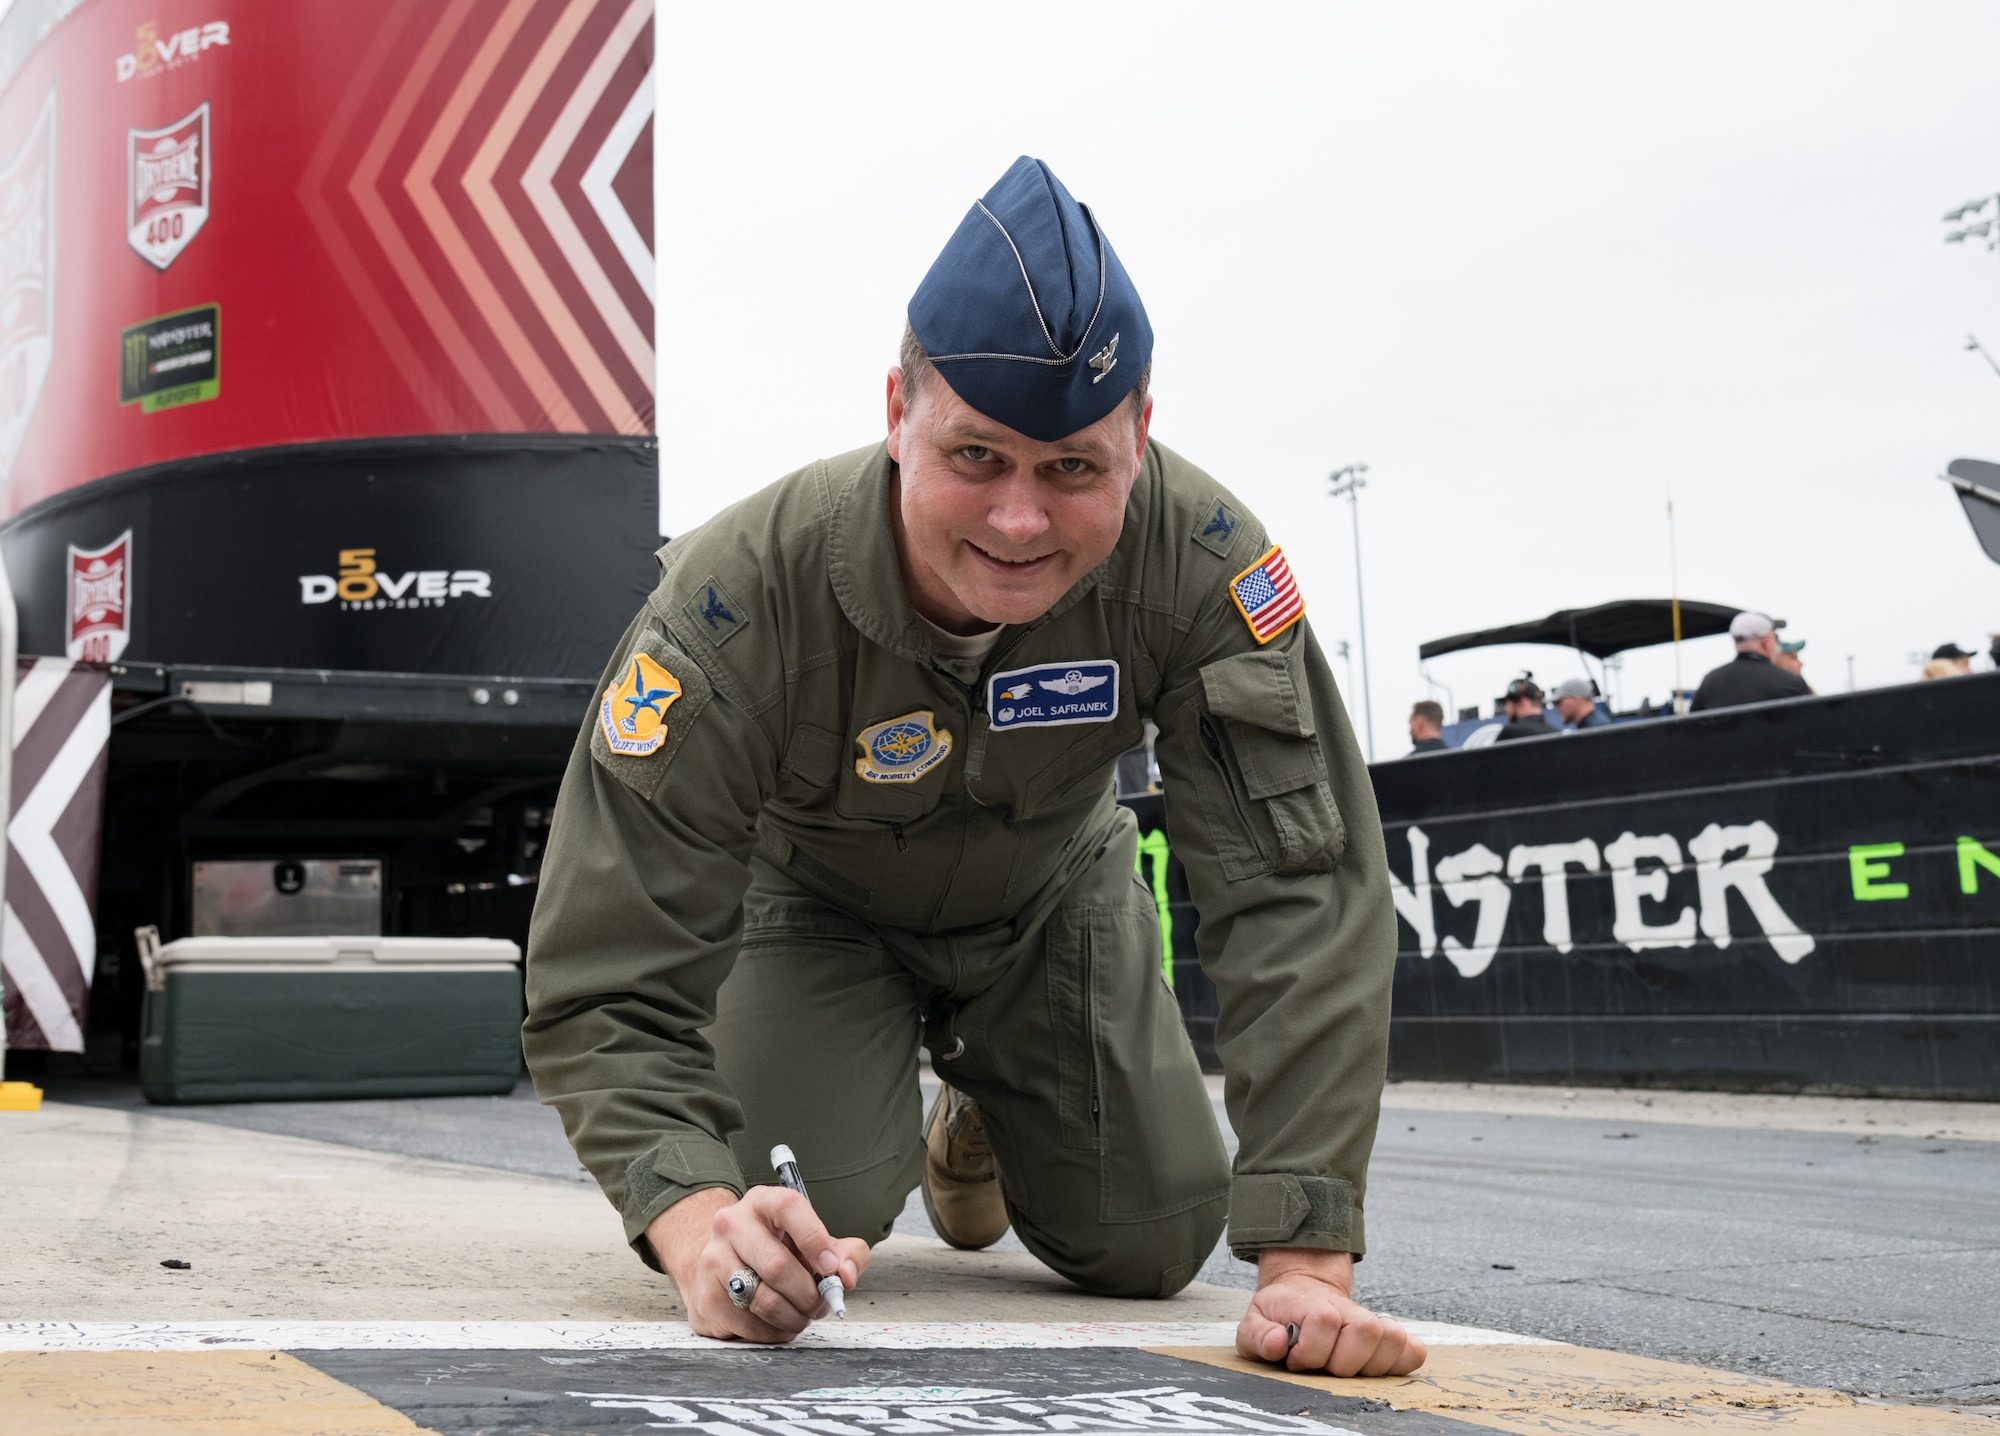 Col. Joel Safranek, 436th Airlift Wing commander, writes on the racetrack start/finish line Oct. 6, 2019, at Dover International Speedway, Dover, Del. Safranek took the opportunity to write a message on the checkered line prior to the start of the "Drydene 400" Monster Energy NASCAR Cup Series playoff race. (U.S. Air Force photo by Roland Balik)